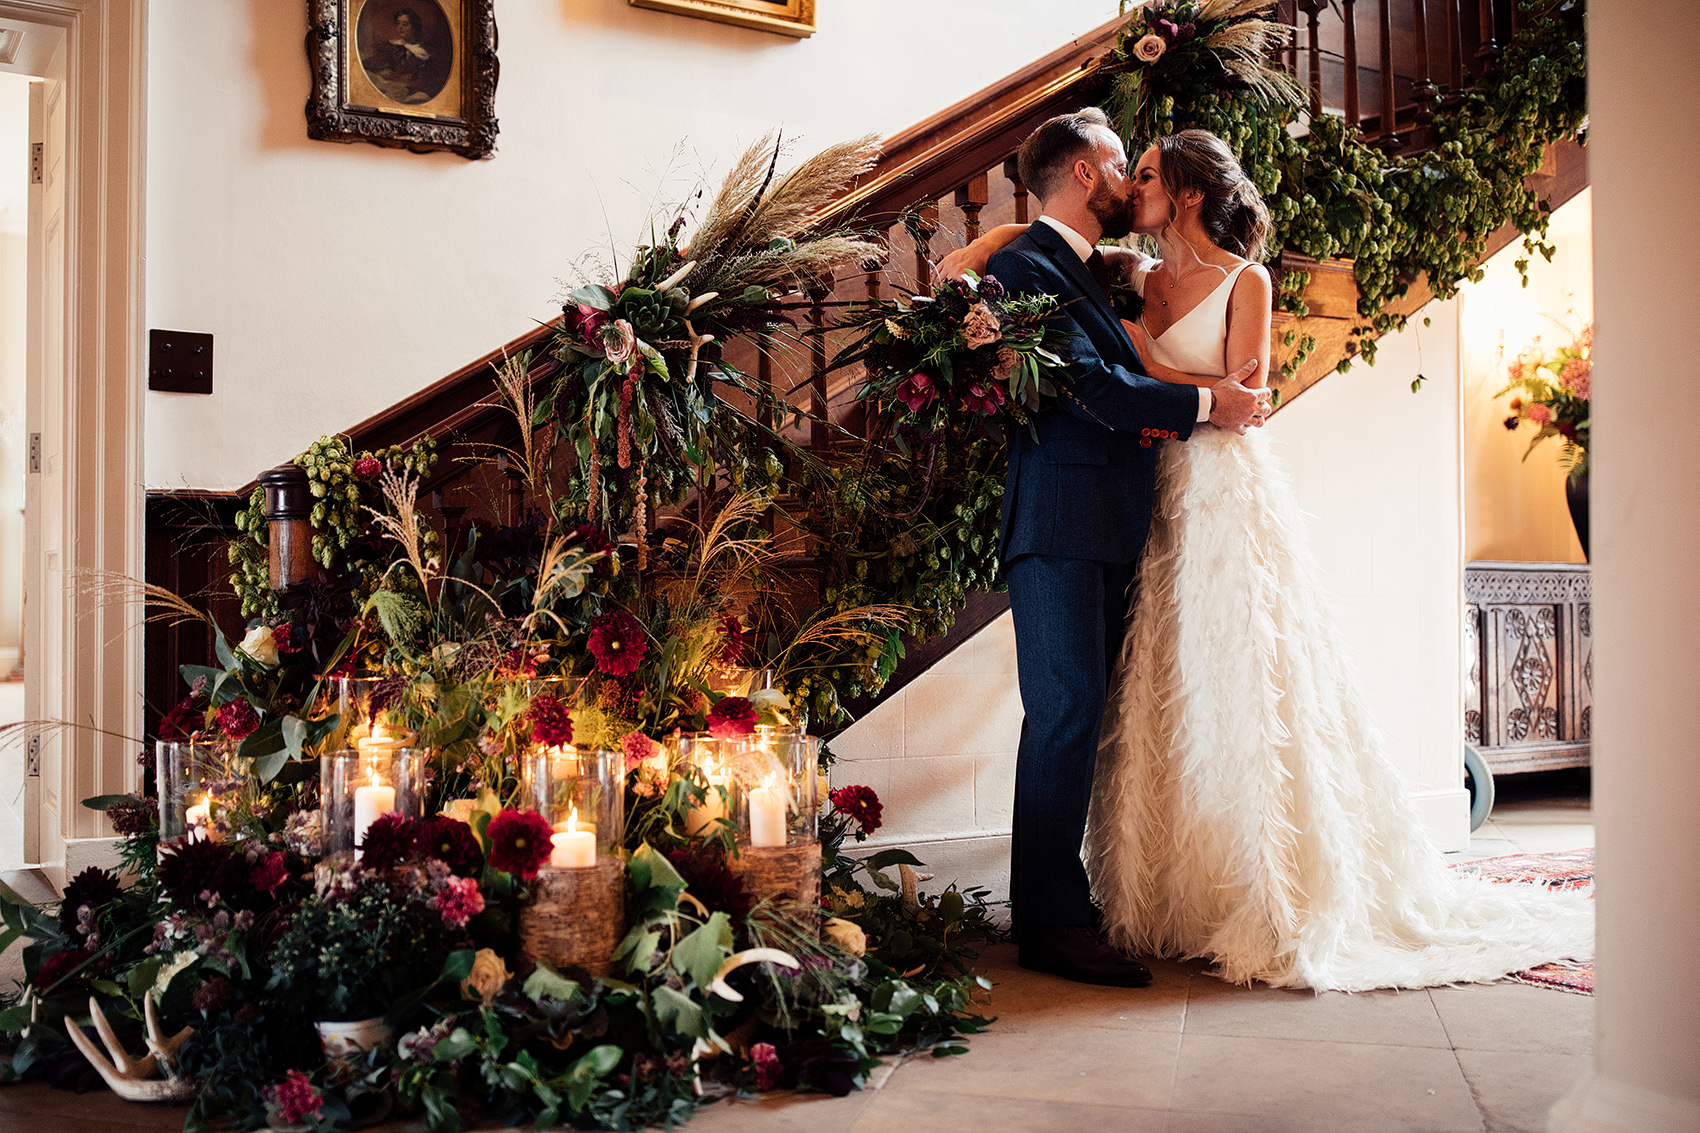 A bride and groom kiss at the bottom of a set of antique wooden stairs surrounded by candles and Autumnal foliage